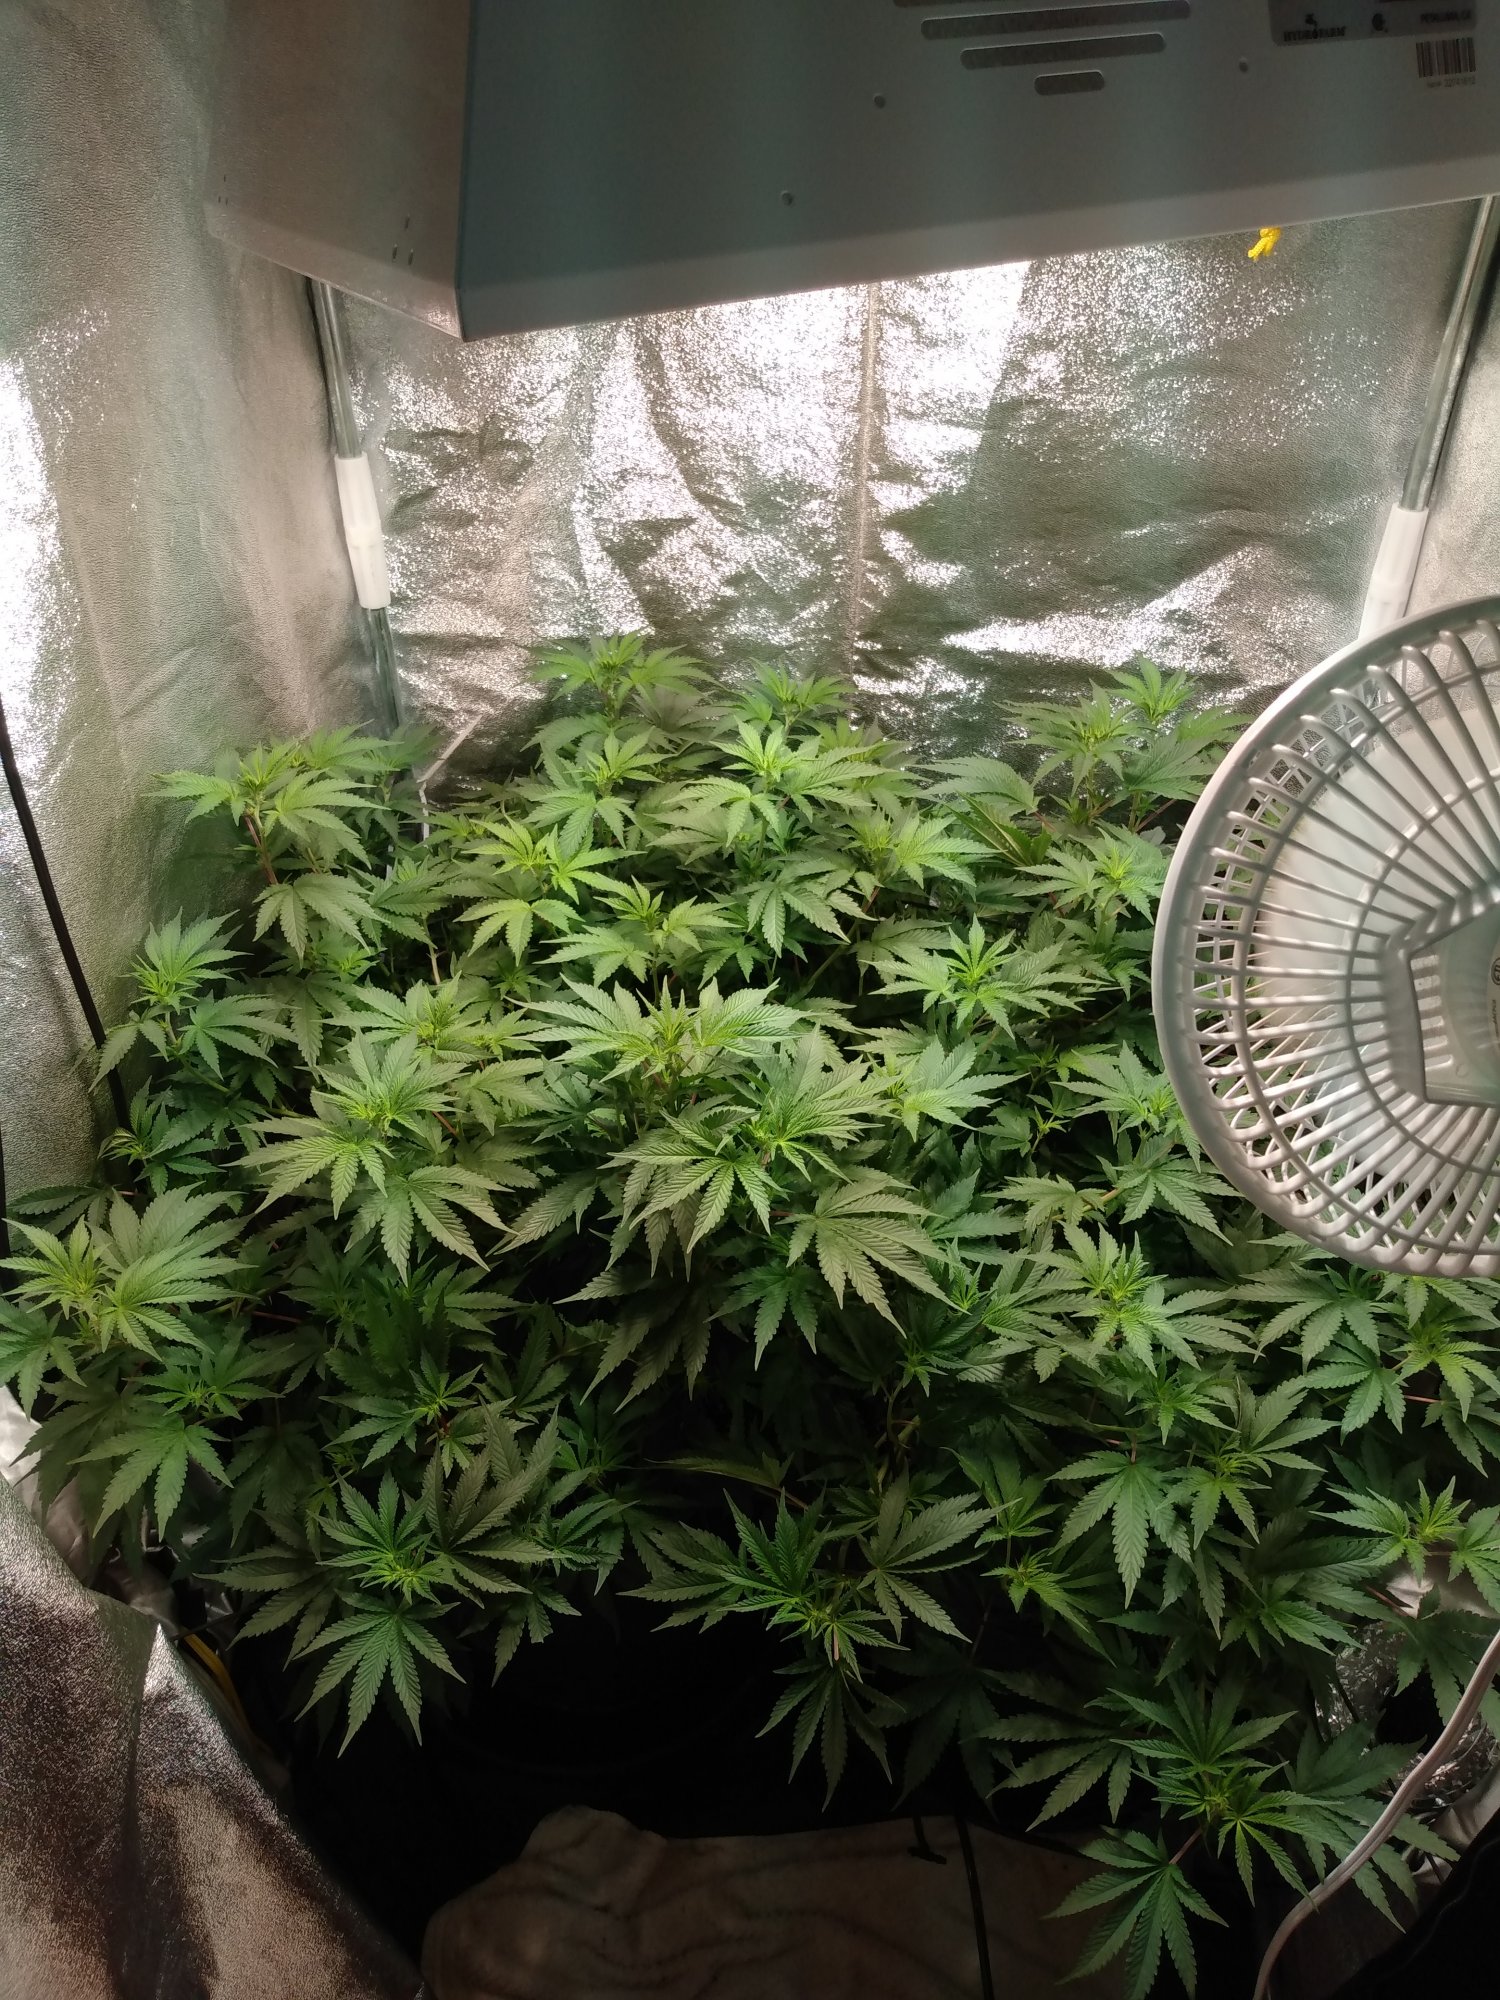 First real indoor grow